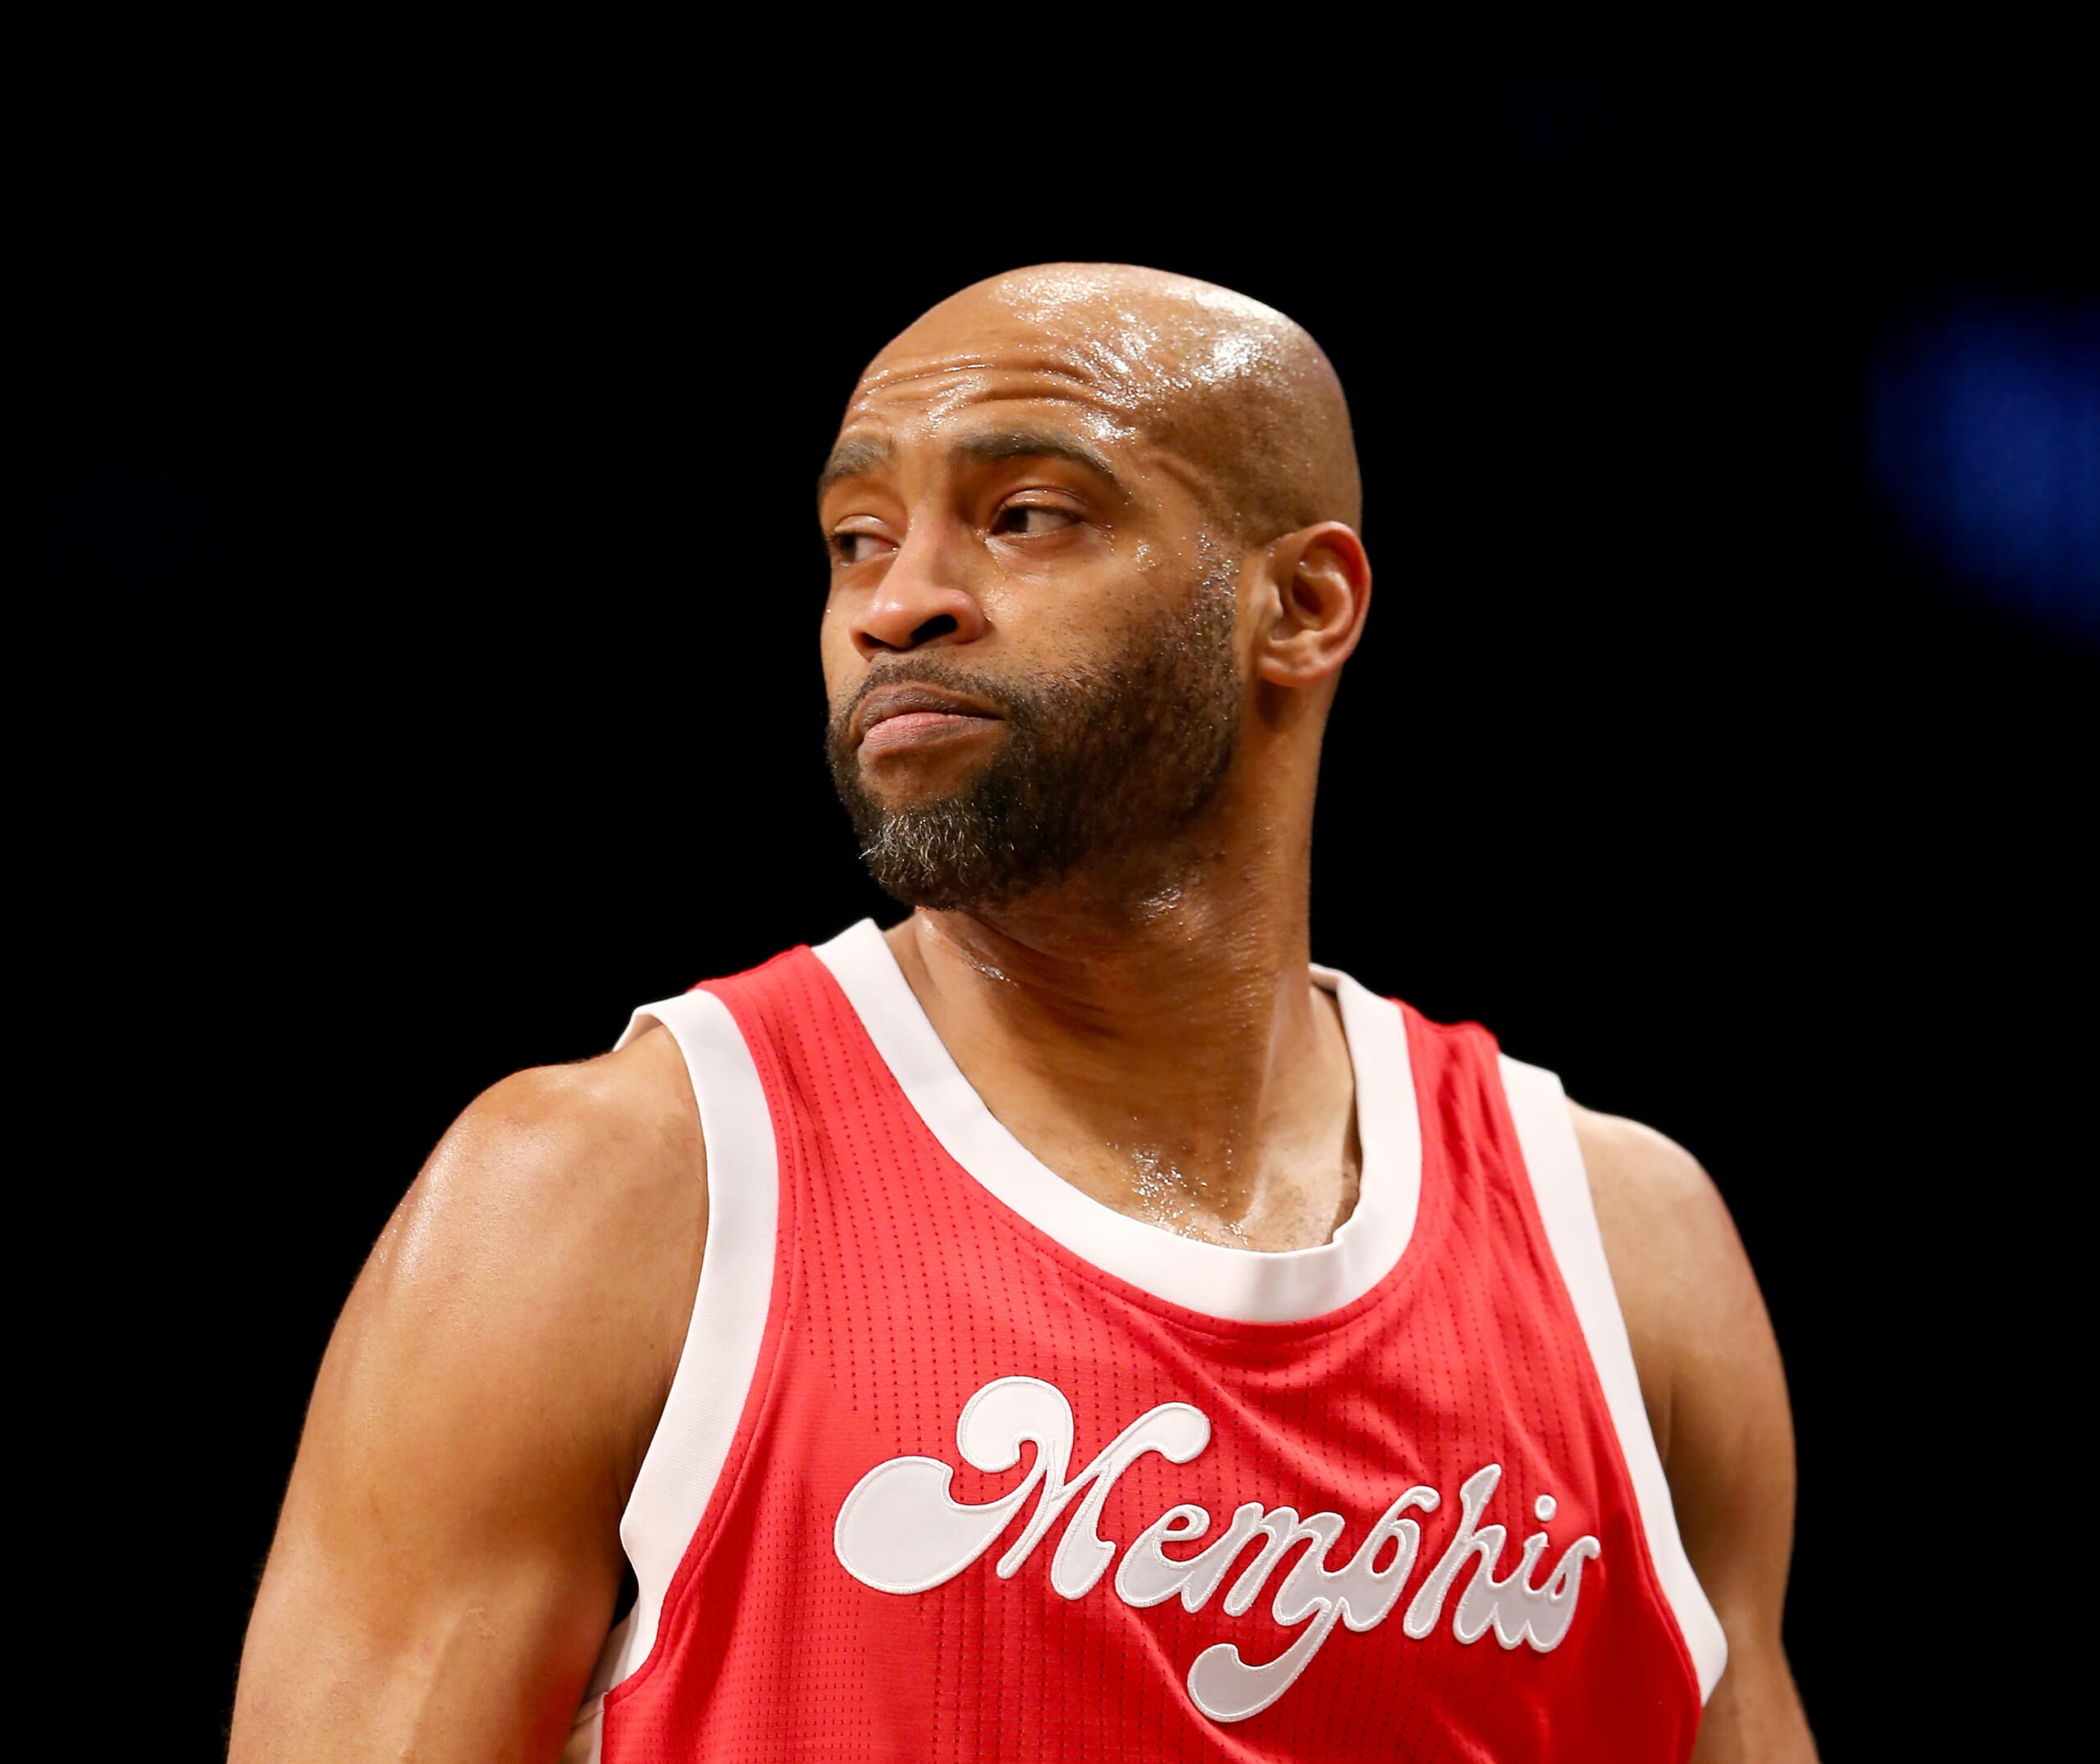 Media Day: Vince Carter is looking to bring leadership to the